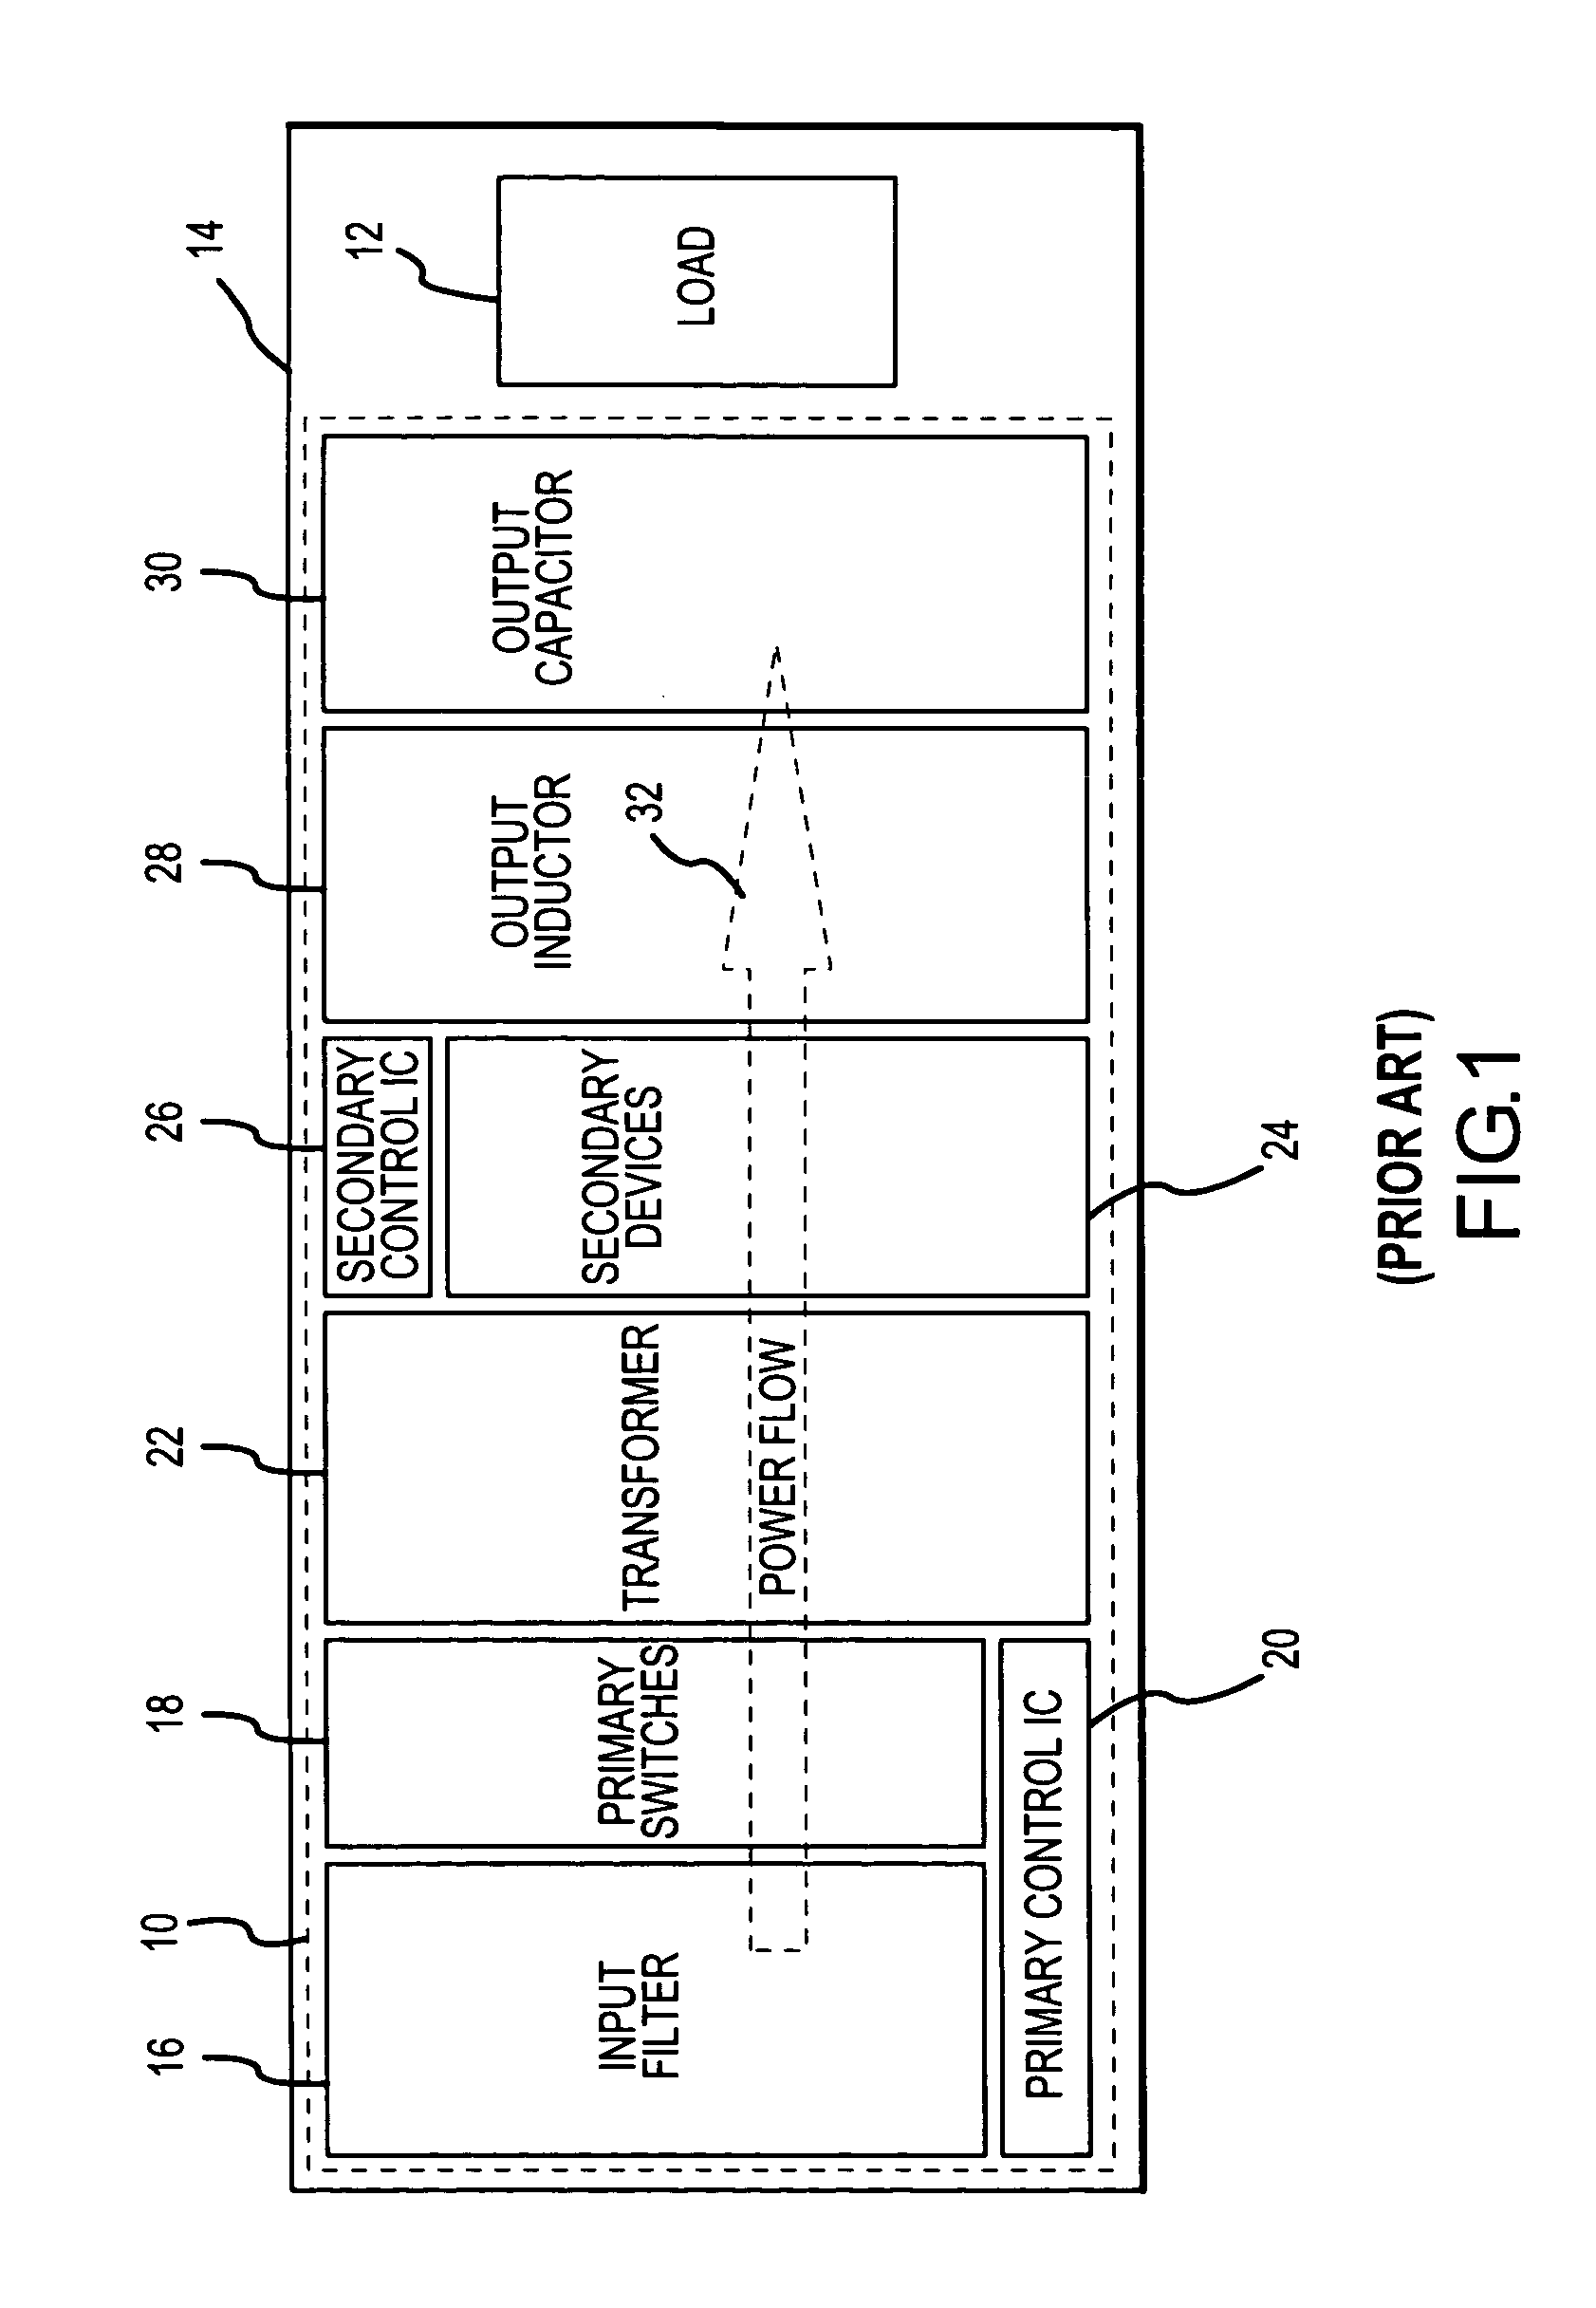 Vertically packaged switched-mode power converter